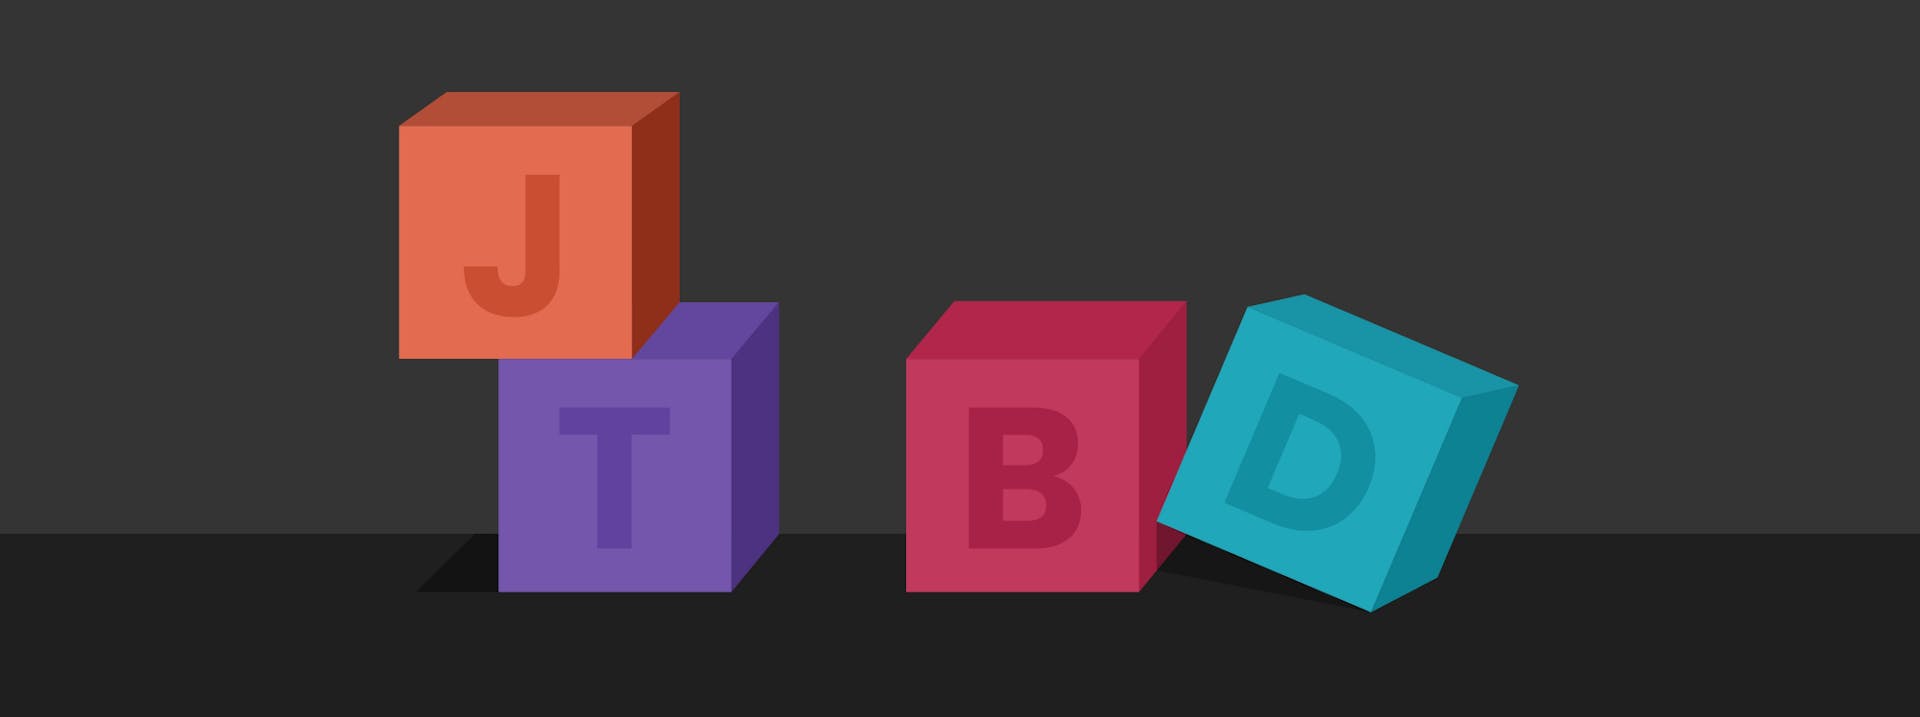 Illustration of four cubes in orange, purple, red and blue with the letters J, T, B and D etched onto them